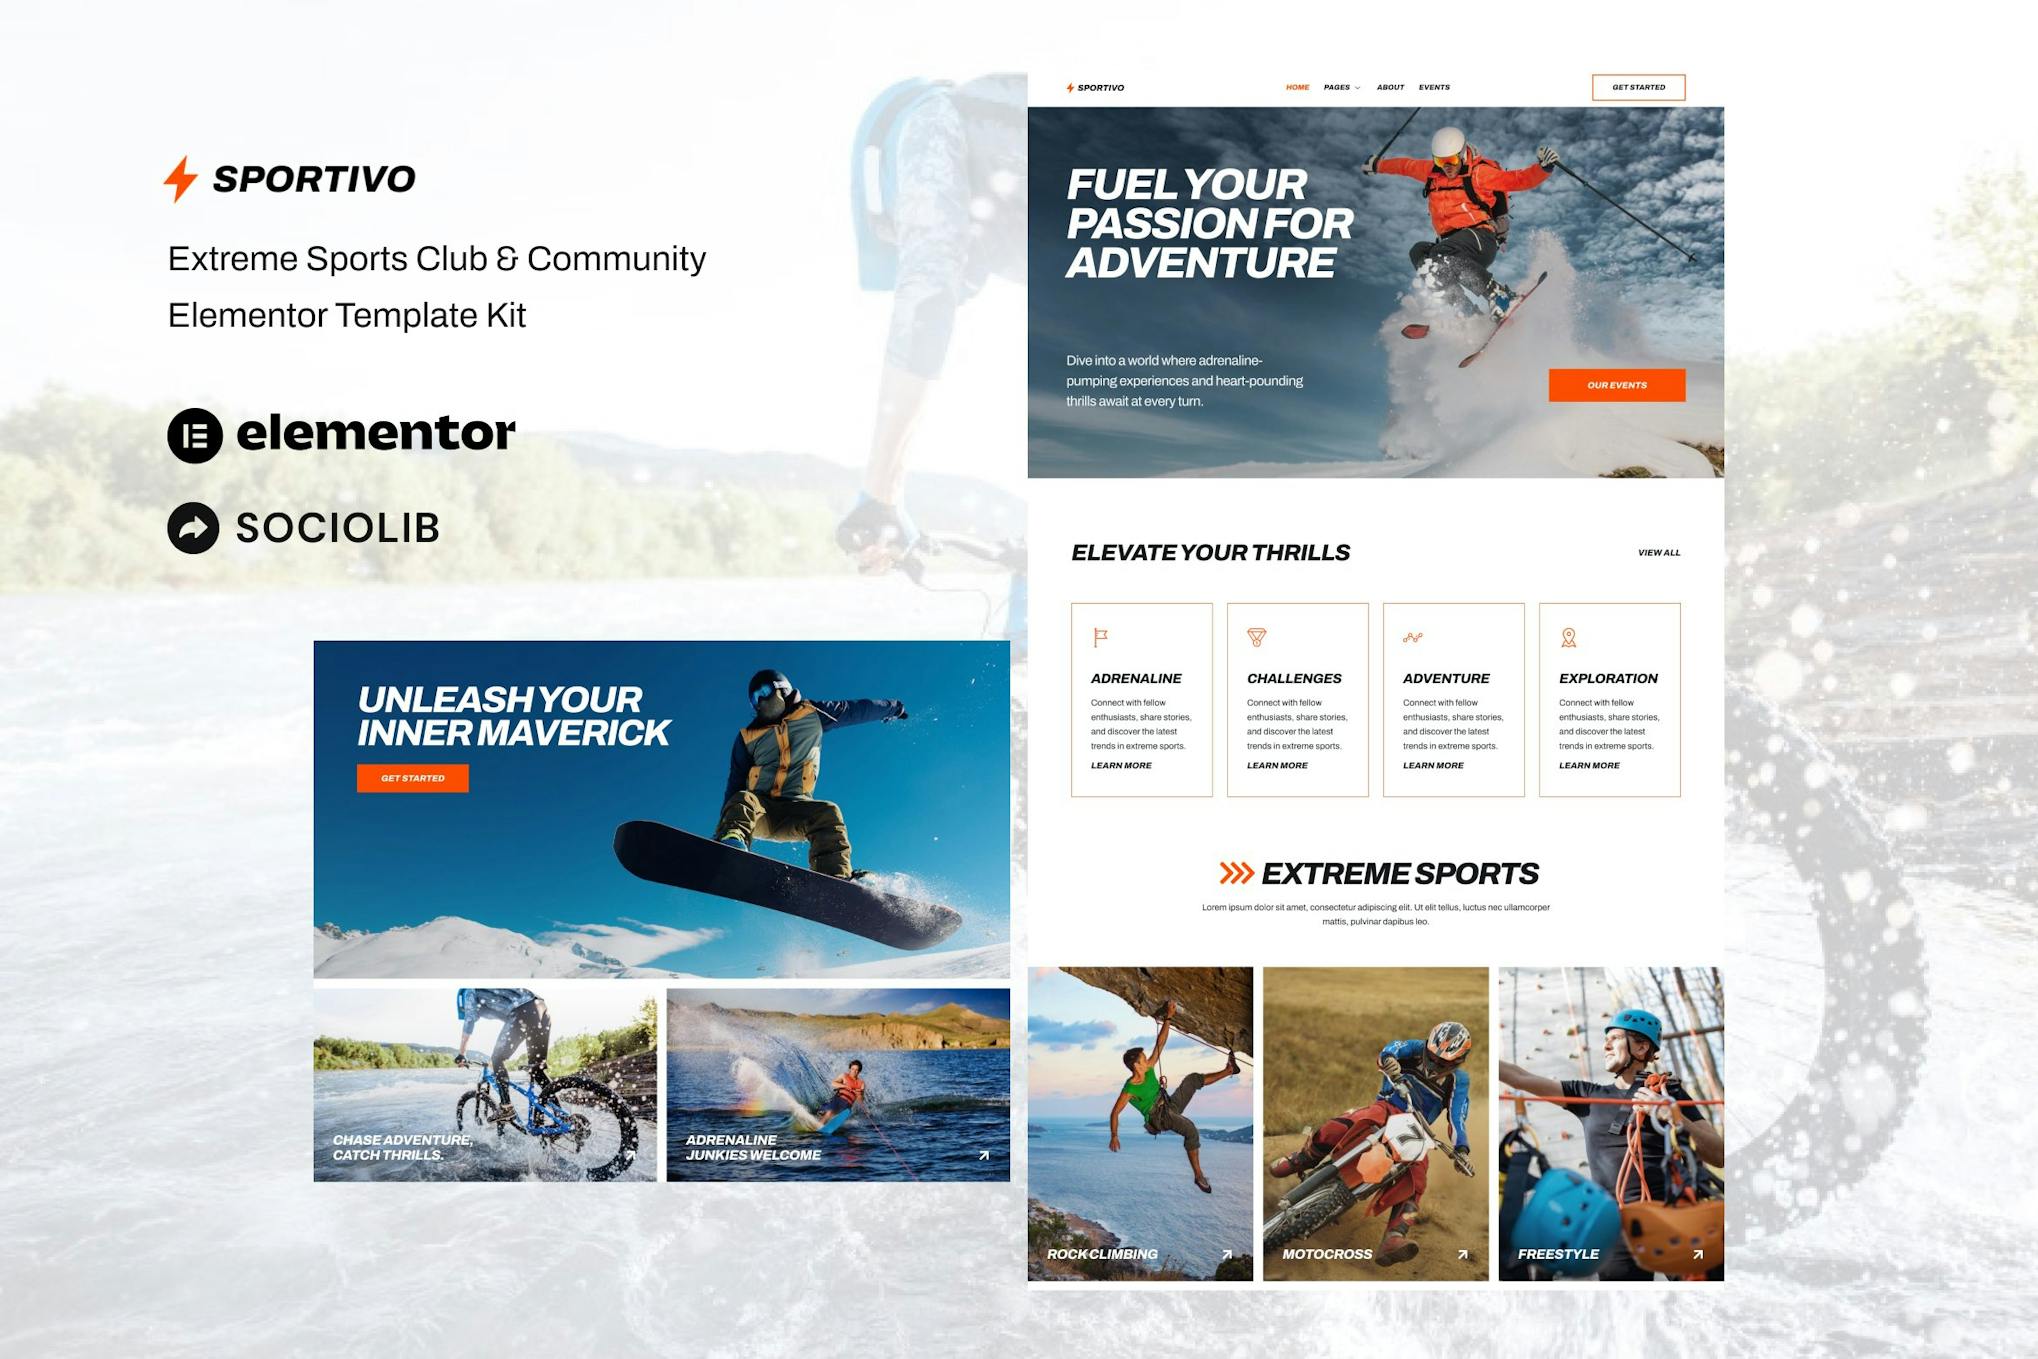 Download Sportivo - Extreme Sports Club & Community Elementor Template Kit